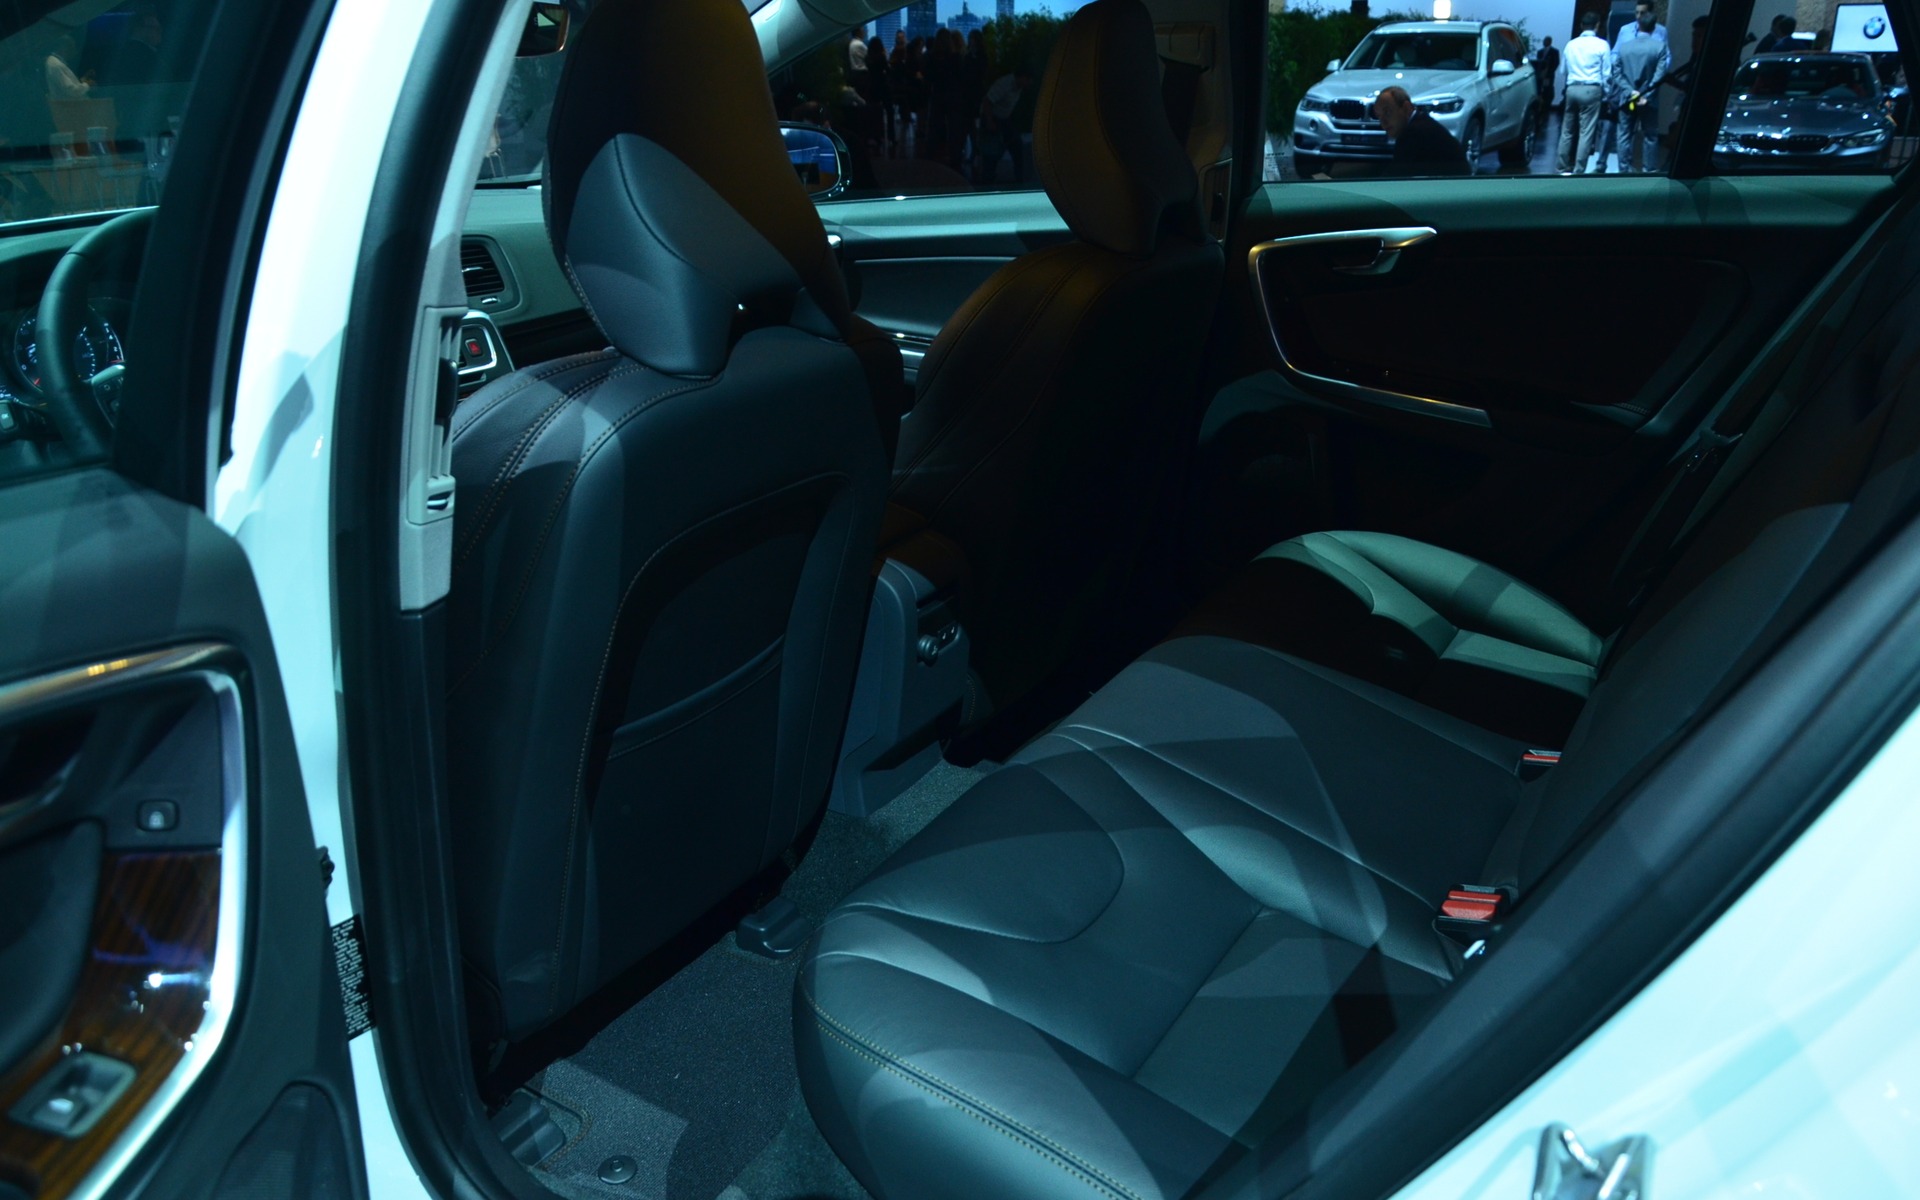 Passenger room is good in both the front and the rear of the V60.